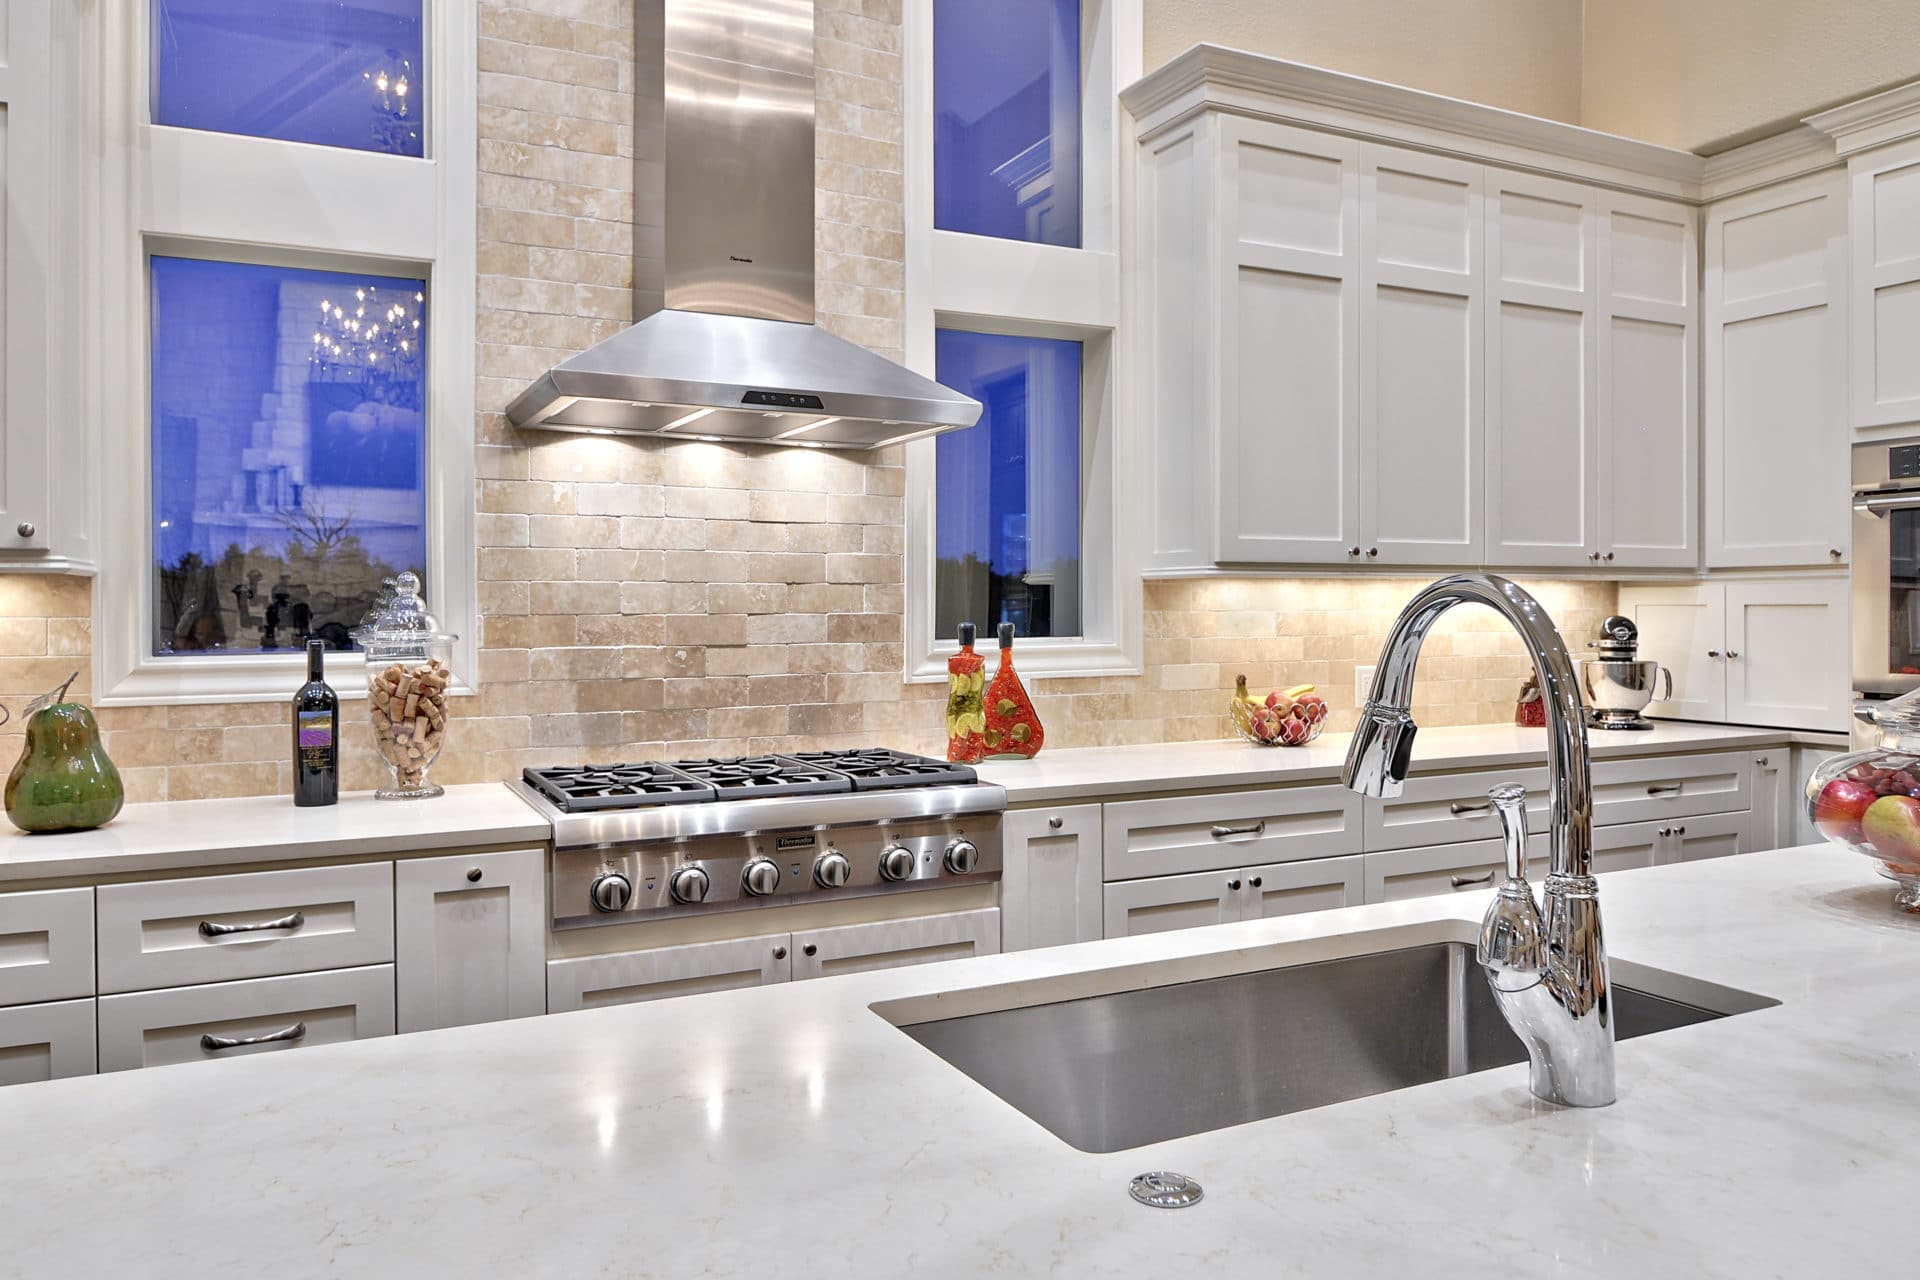 How to Select the Best Appliances for Your Kitchen Remodel